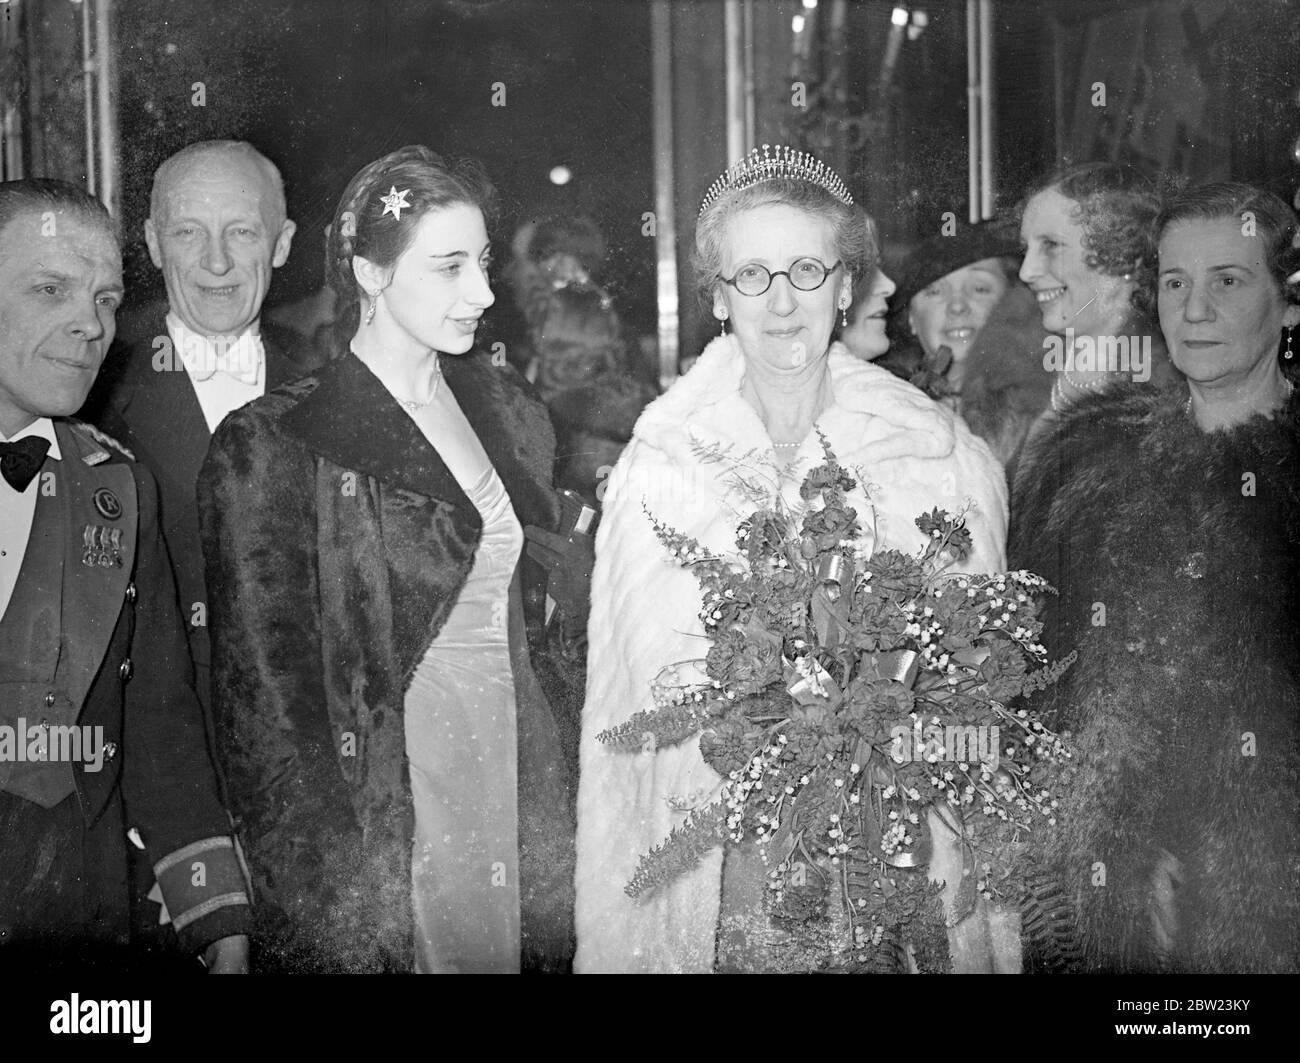 Lady Mayoress at new laughton film premiere. Charles Laughton's new film 'Vessel of Wrath', was given its premiere at the Regal, Marble Arch. Photo shows, the Lady Mayoress, Lady Twyford, and her daughter at the premiere.. 24 February 1938 Stock Photo